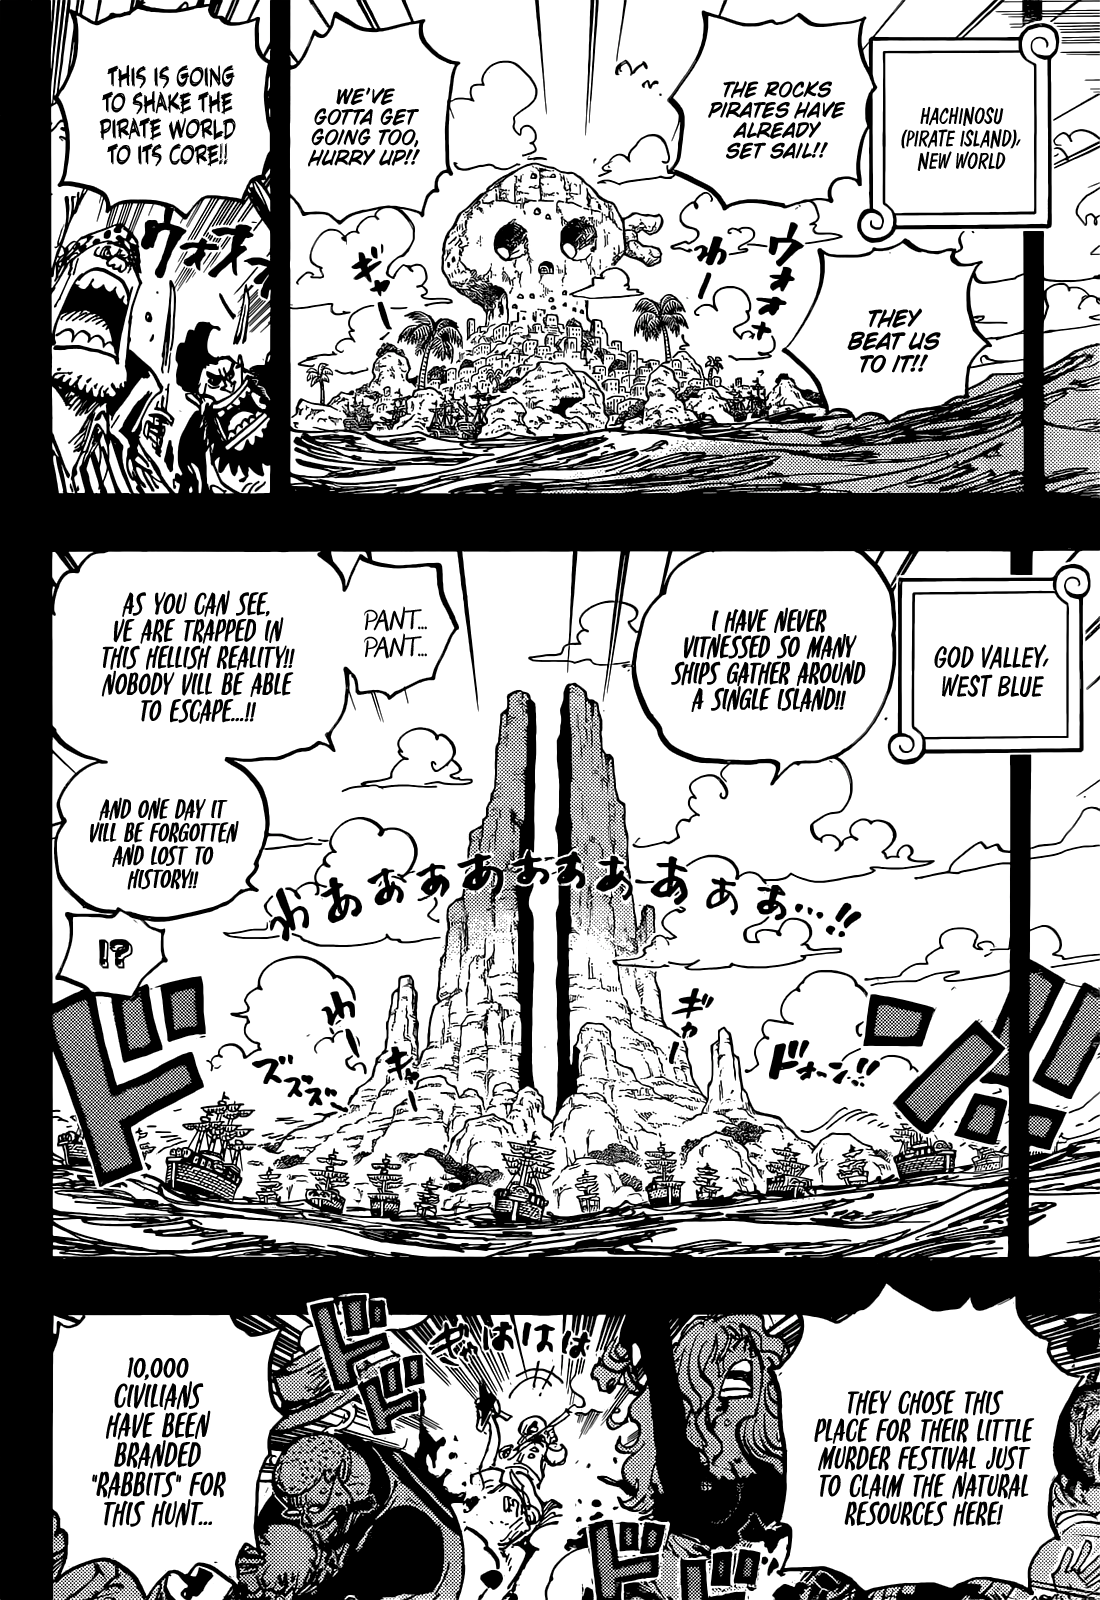 The 'Prize' of God Valley (1095+) : r/OnePiece